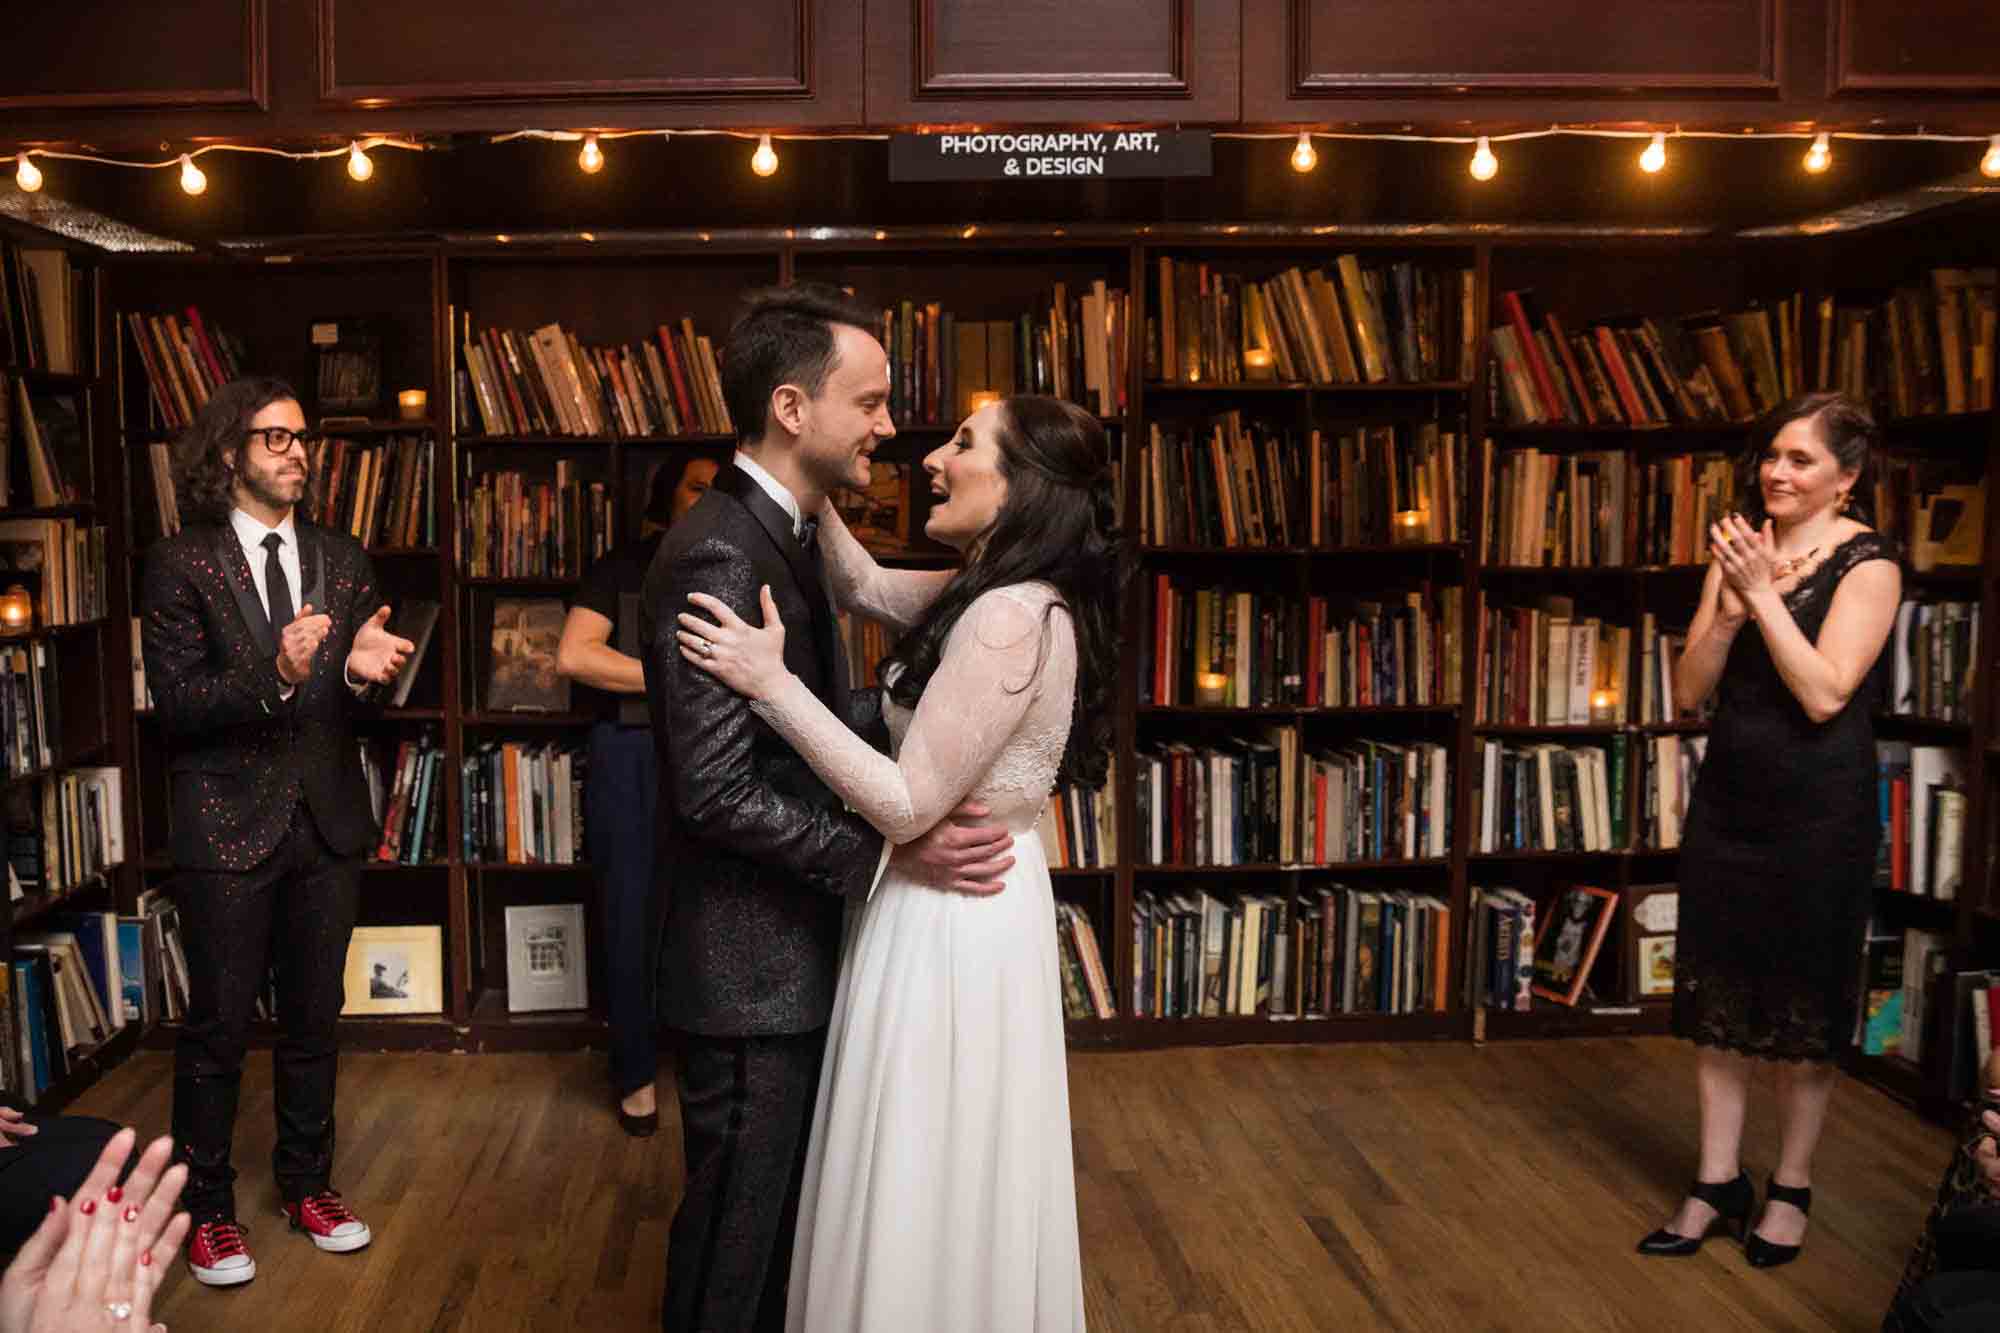 Bride and groom hugging in bookstore for an article on wedding ceremony photo tips